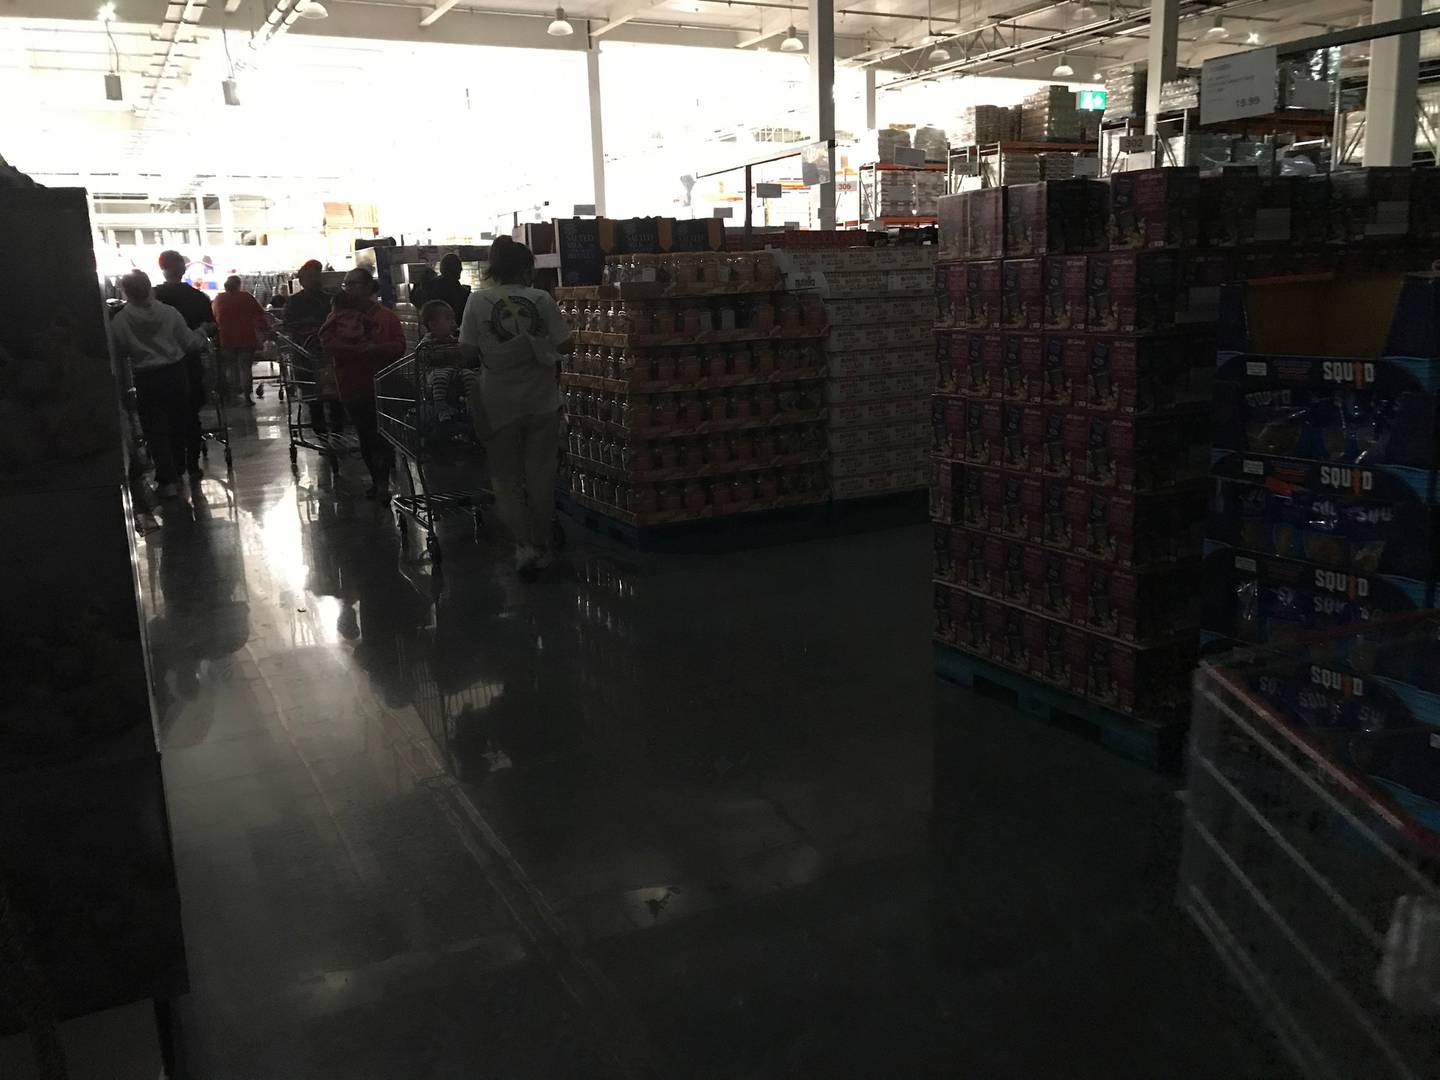 Shoppers kept wandering the aisles despite part of the Costco store losing power. Photo / Supplied